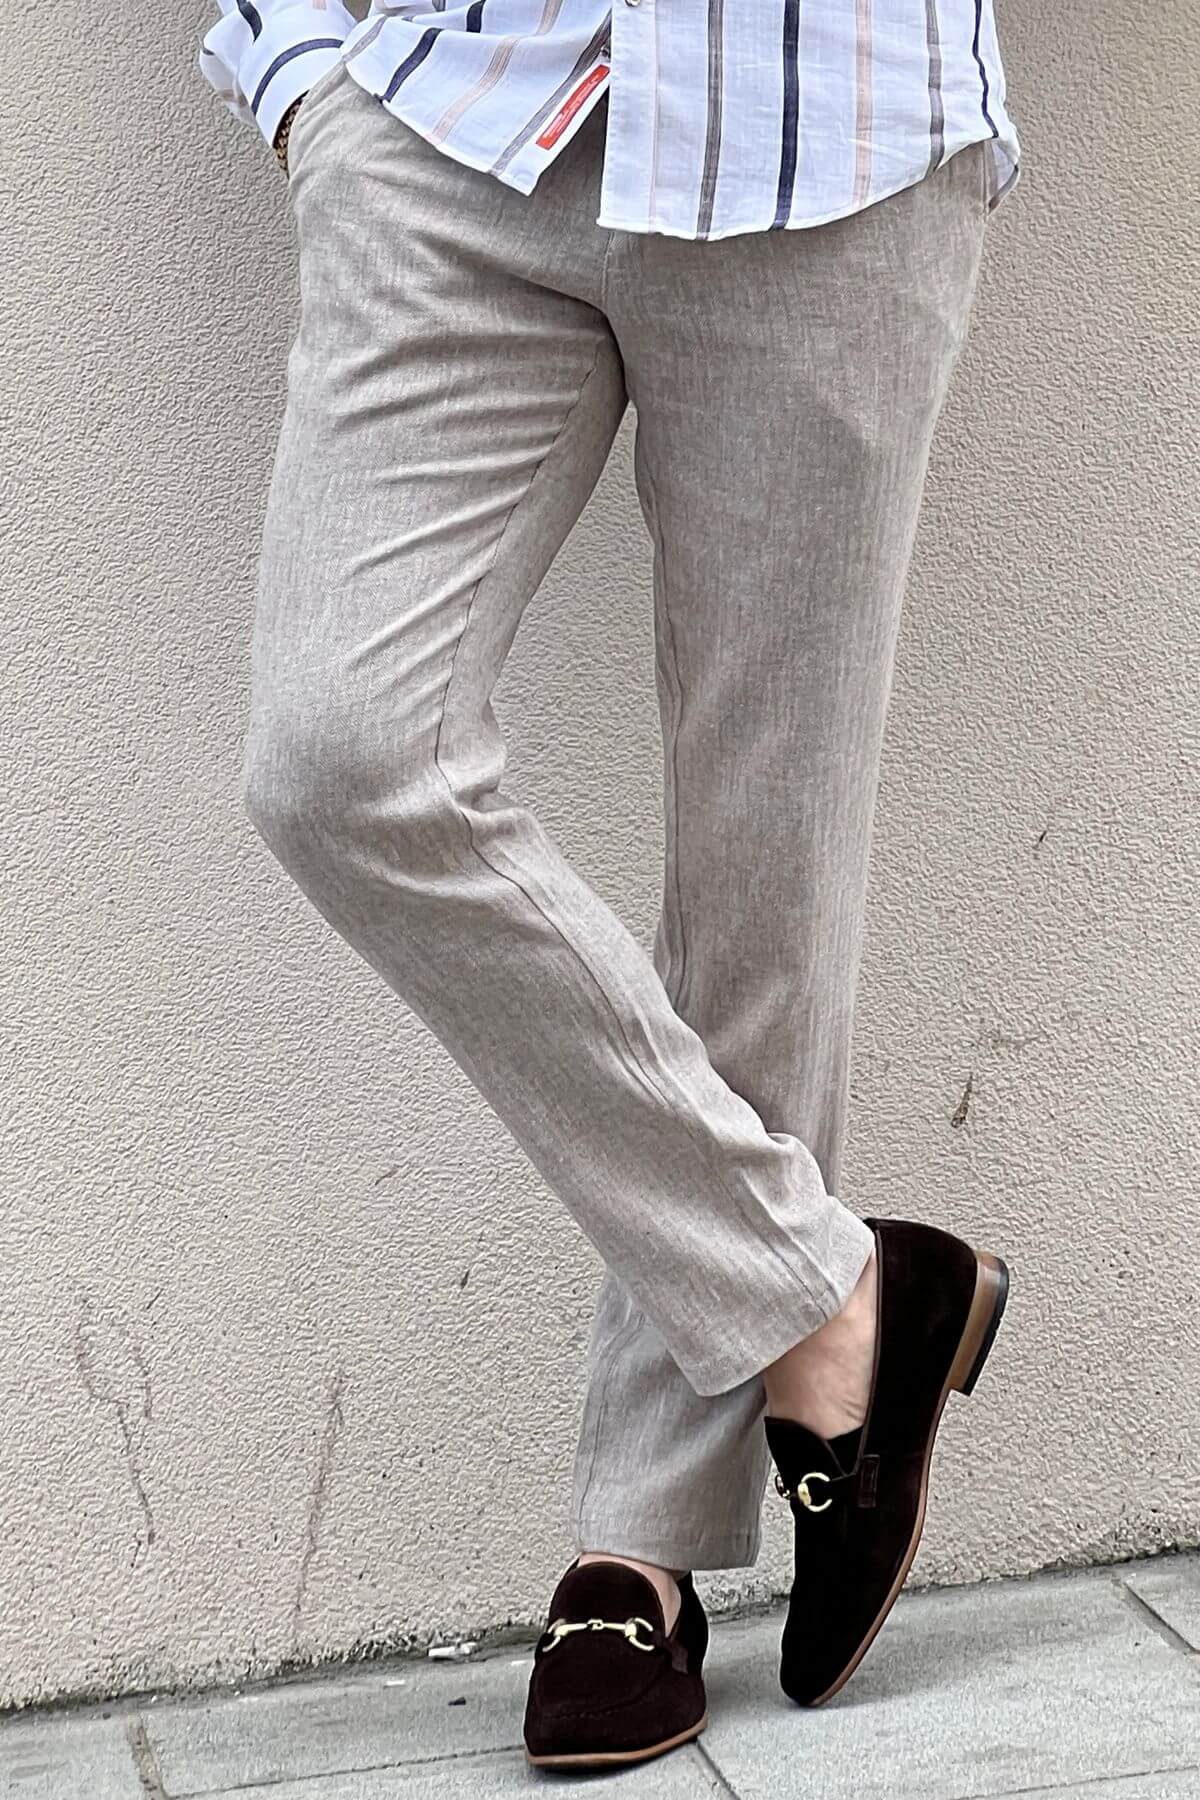 A Beige Linen Trousers on display